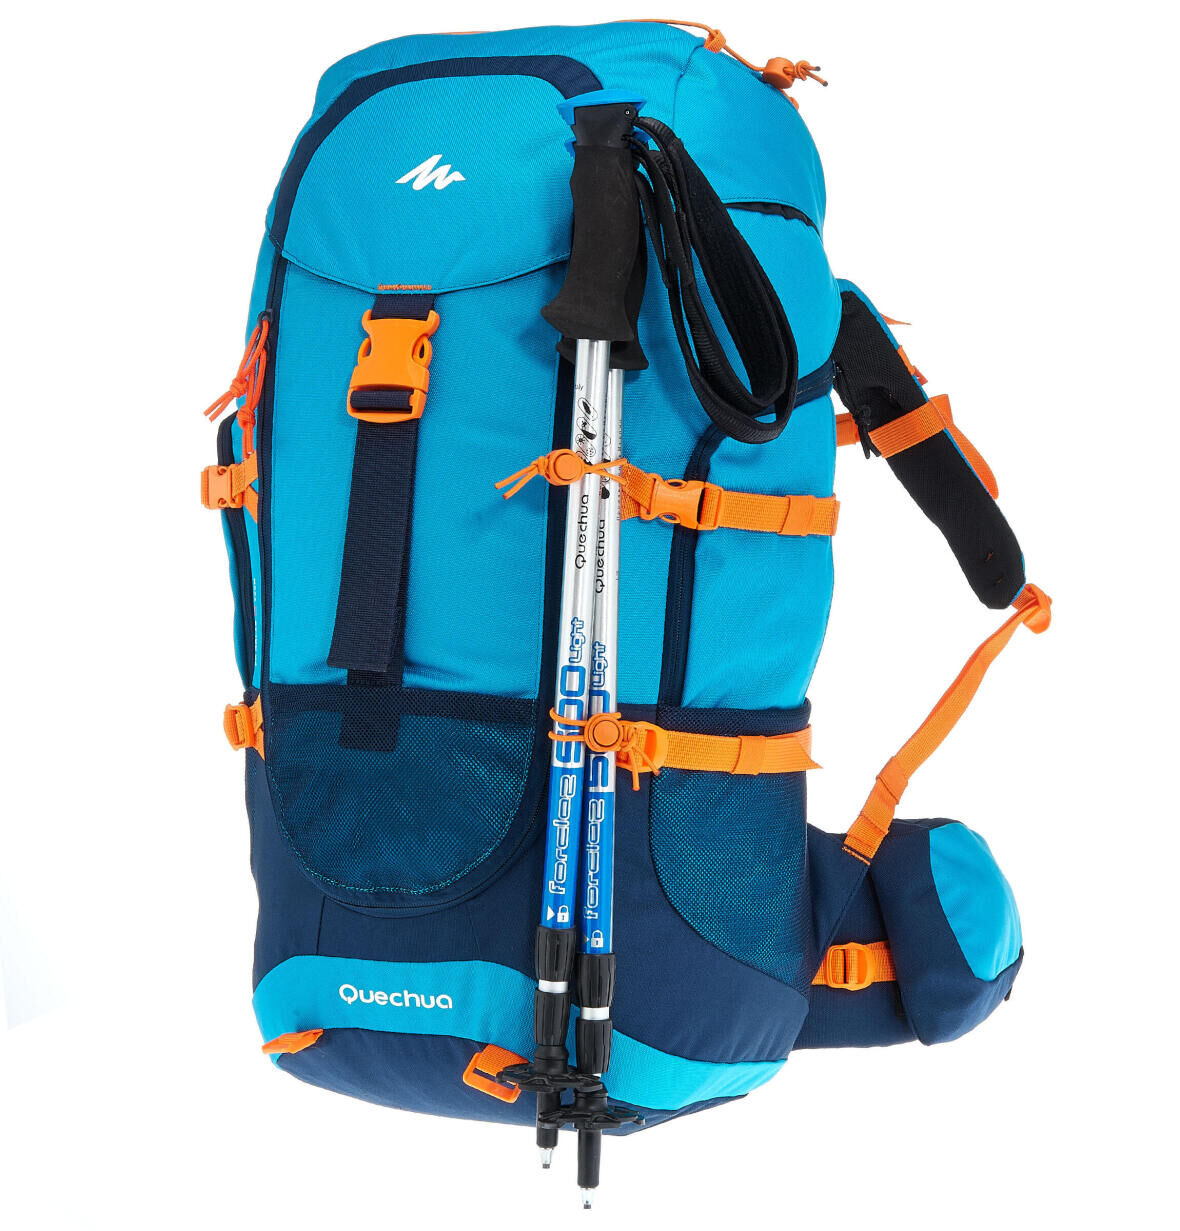 Where to hang your poles on a backpack